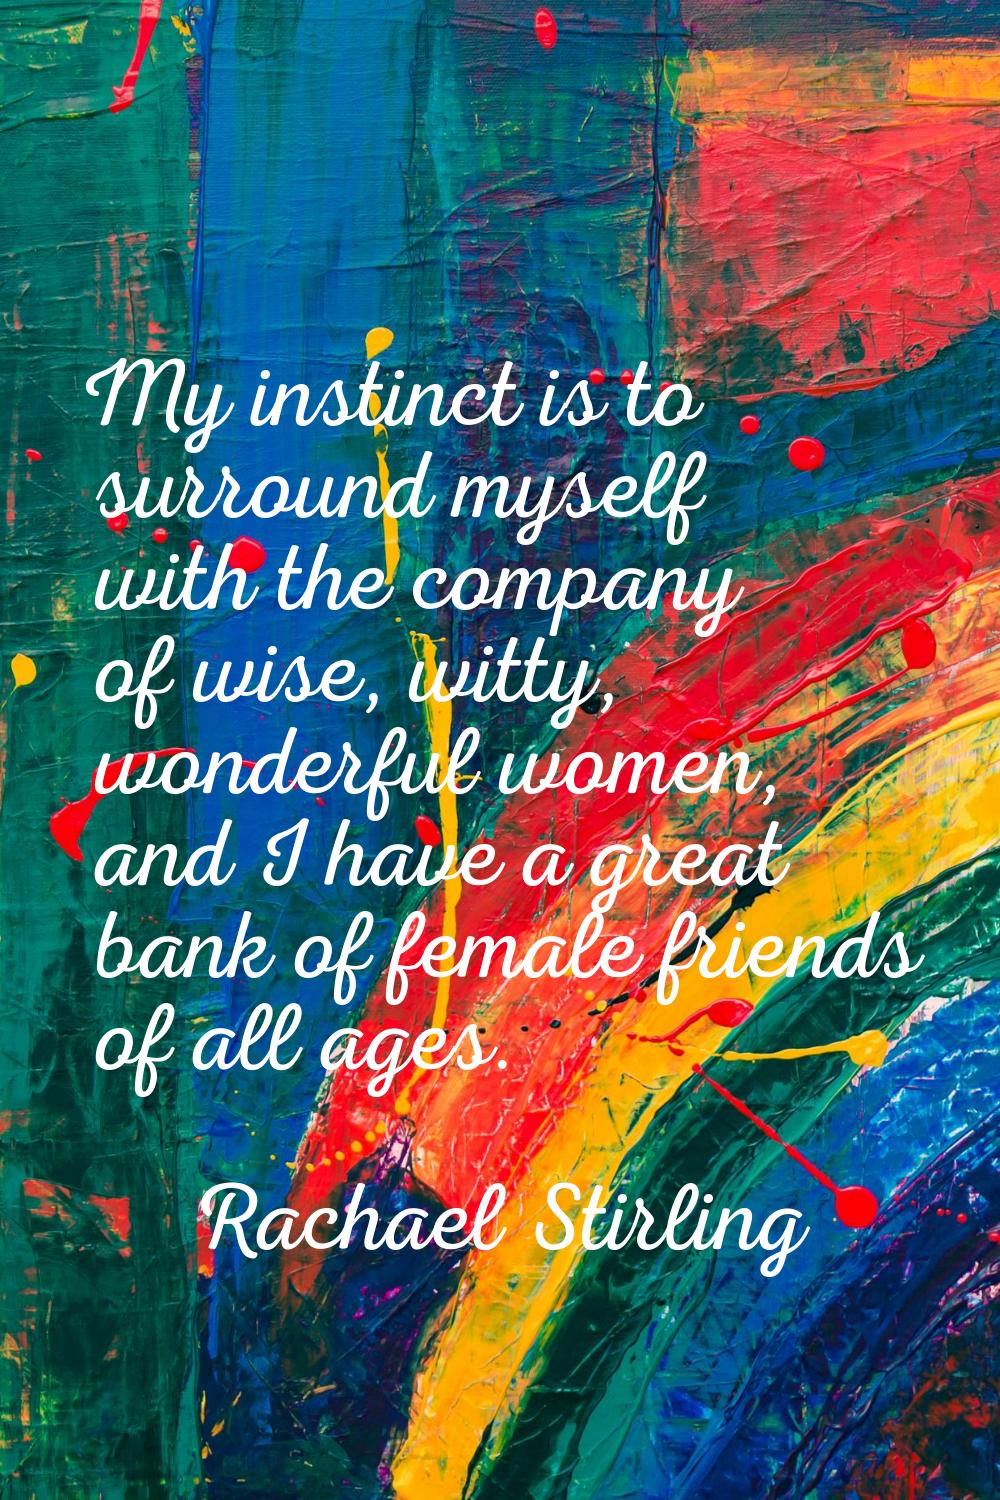 My instinct is to surround myself with the company of wise, witty, wonderful women, and I have a gr